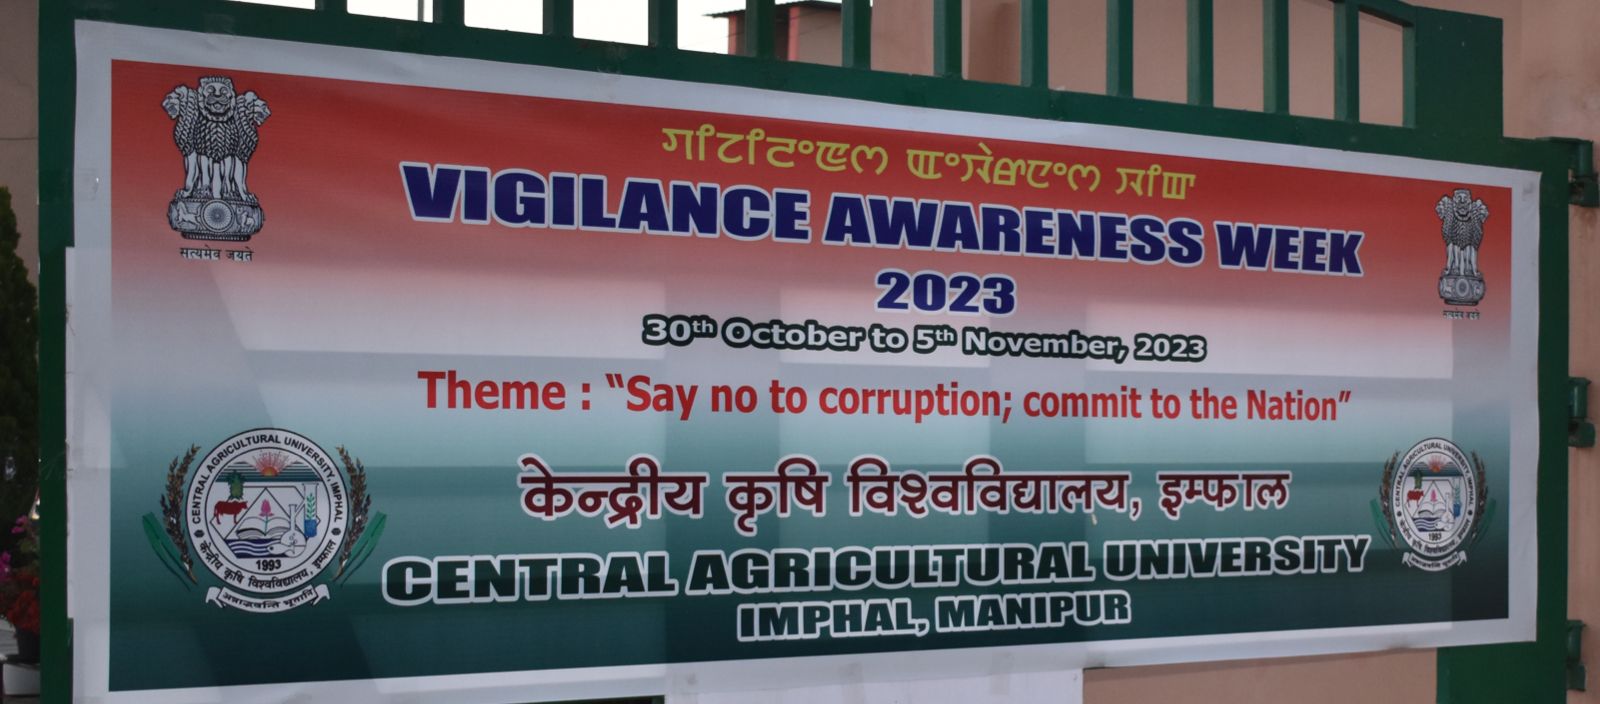 Celebration of Vigilance Awareness Week 2023 under the theme ‘Say no to corruption; commit to the Nation” at Central Agricultural University, Headquarters, Imphal from October 30th to 5th November, 2023.